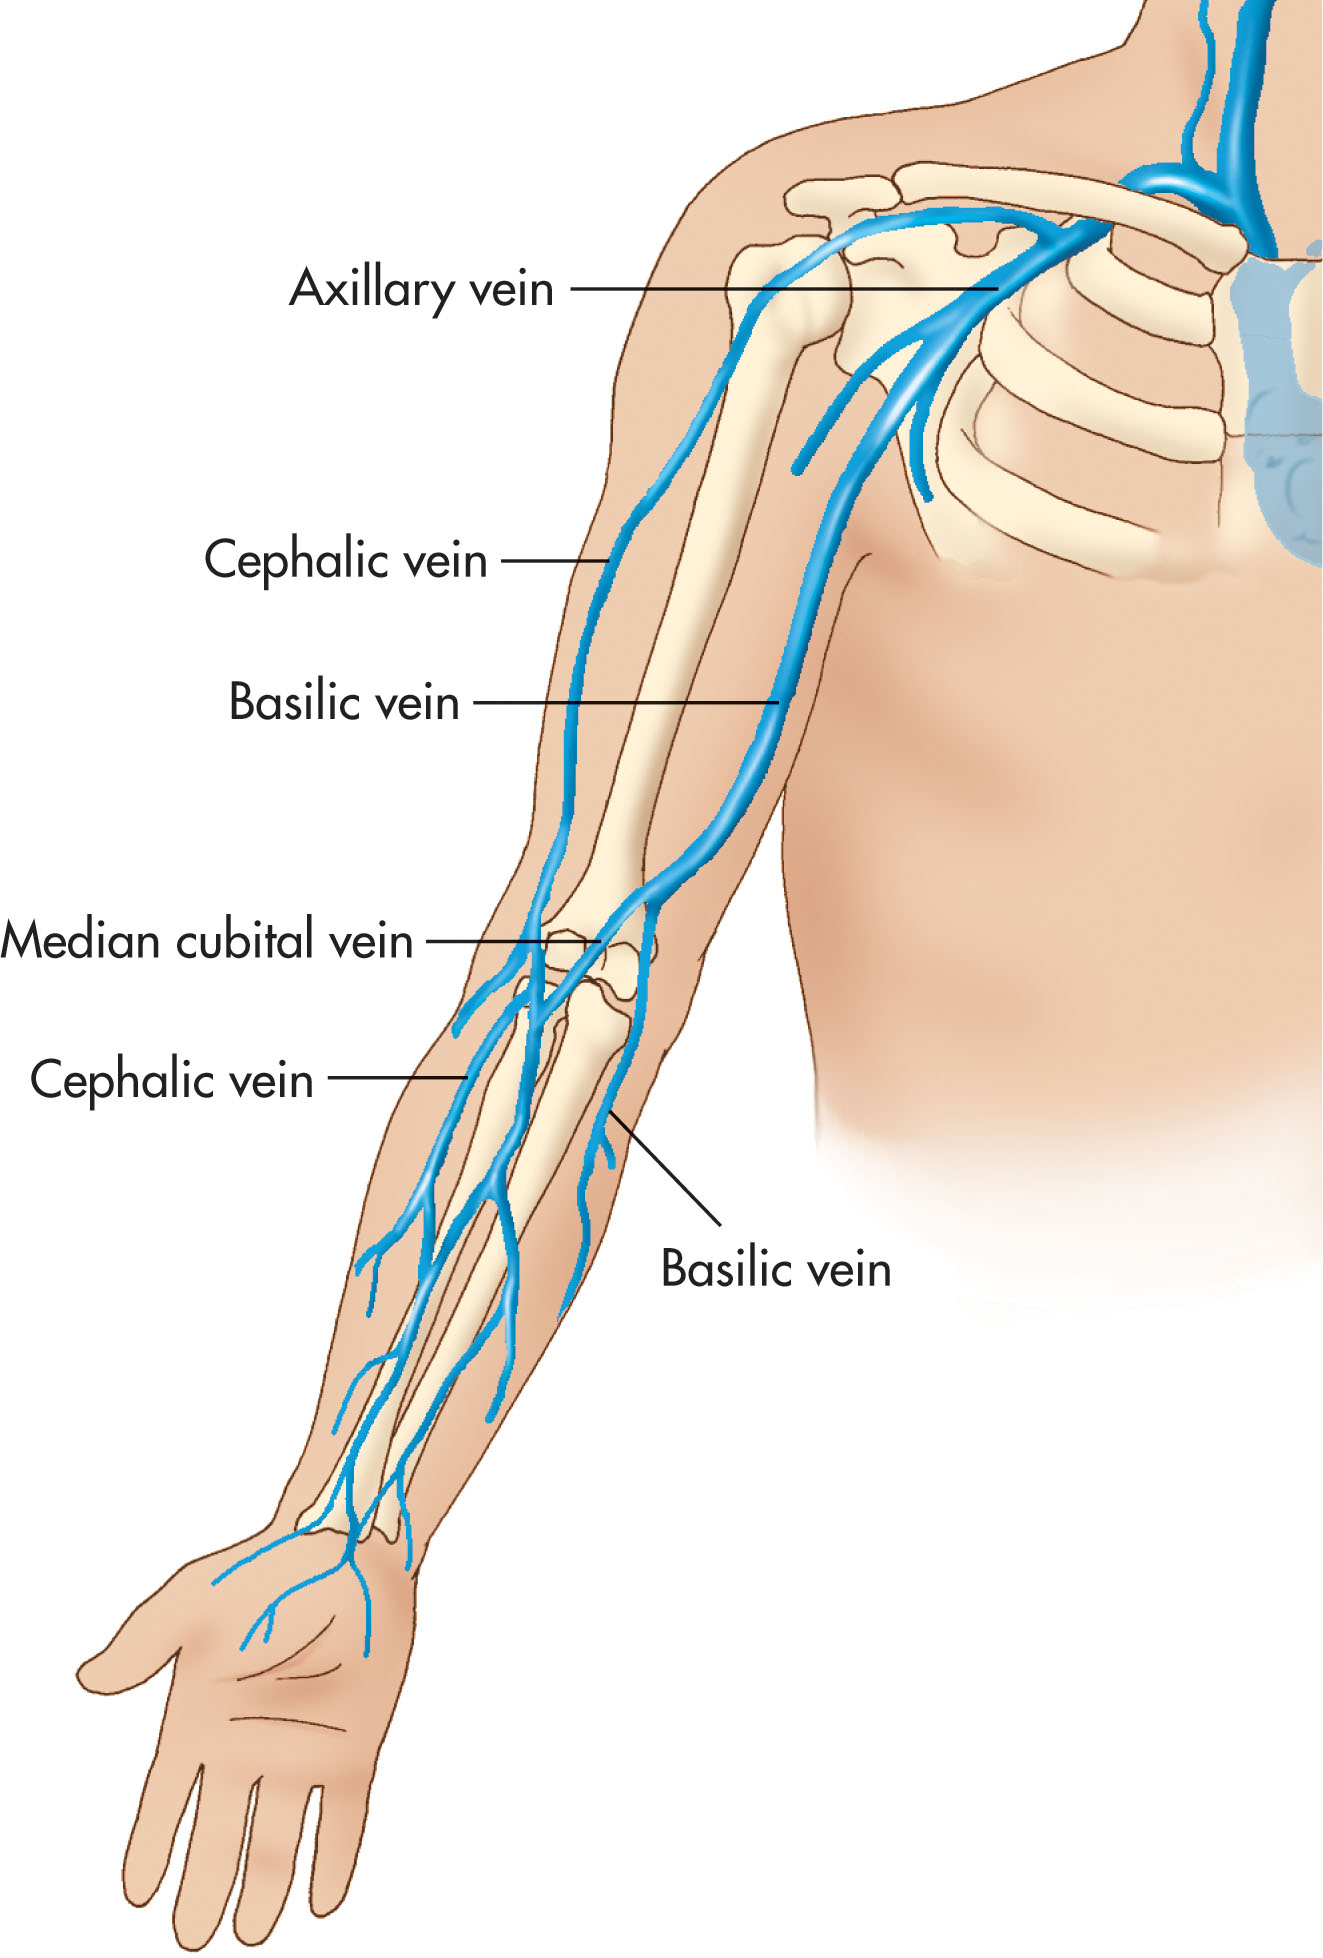 Fig. 40.5, Upper extremity superficial veins.